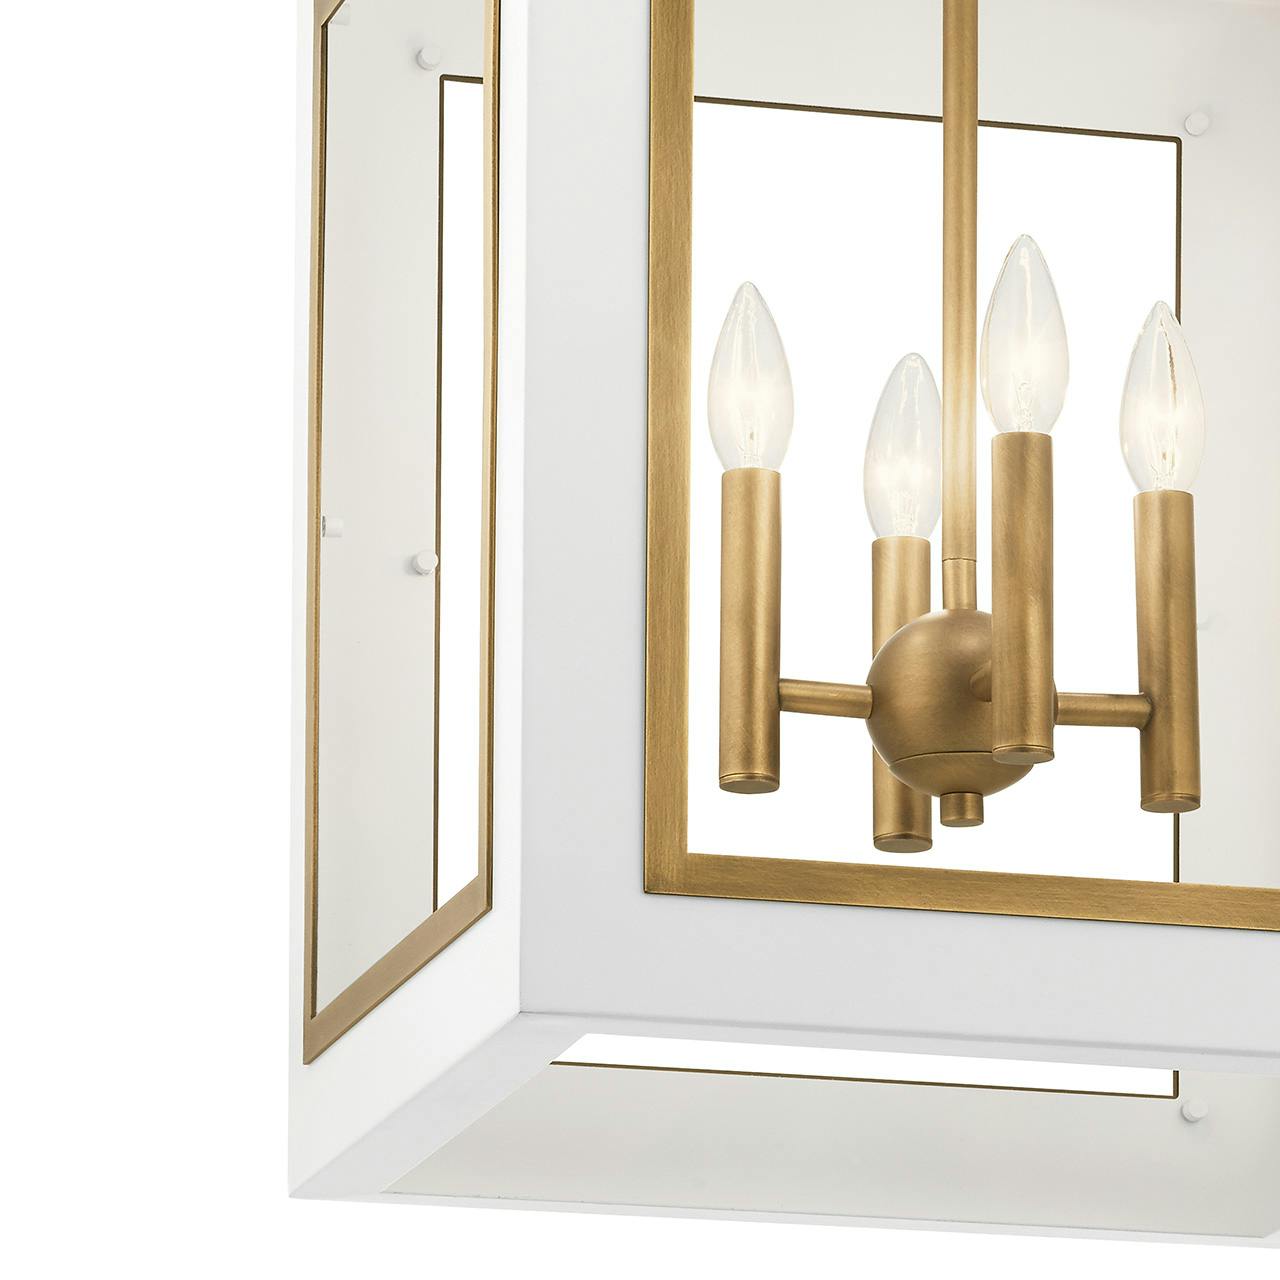 Close up view of the Vath 4 Light Foyer Pendant White & Brass on a white background